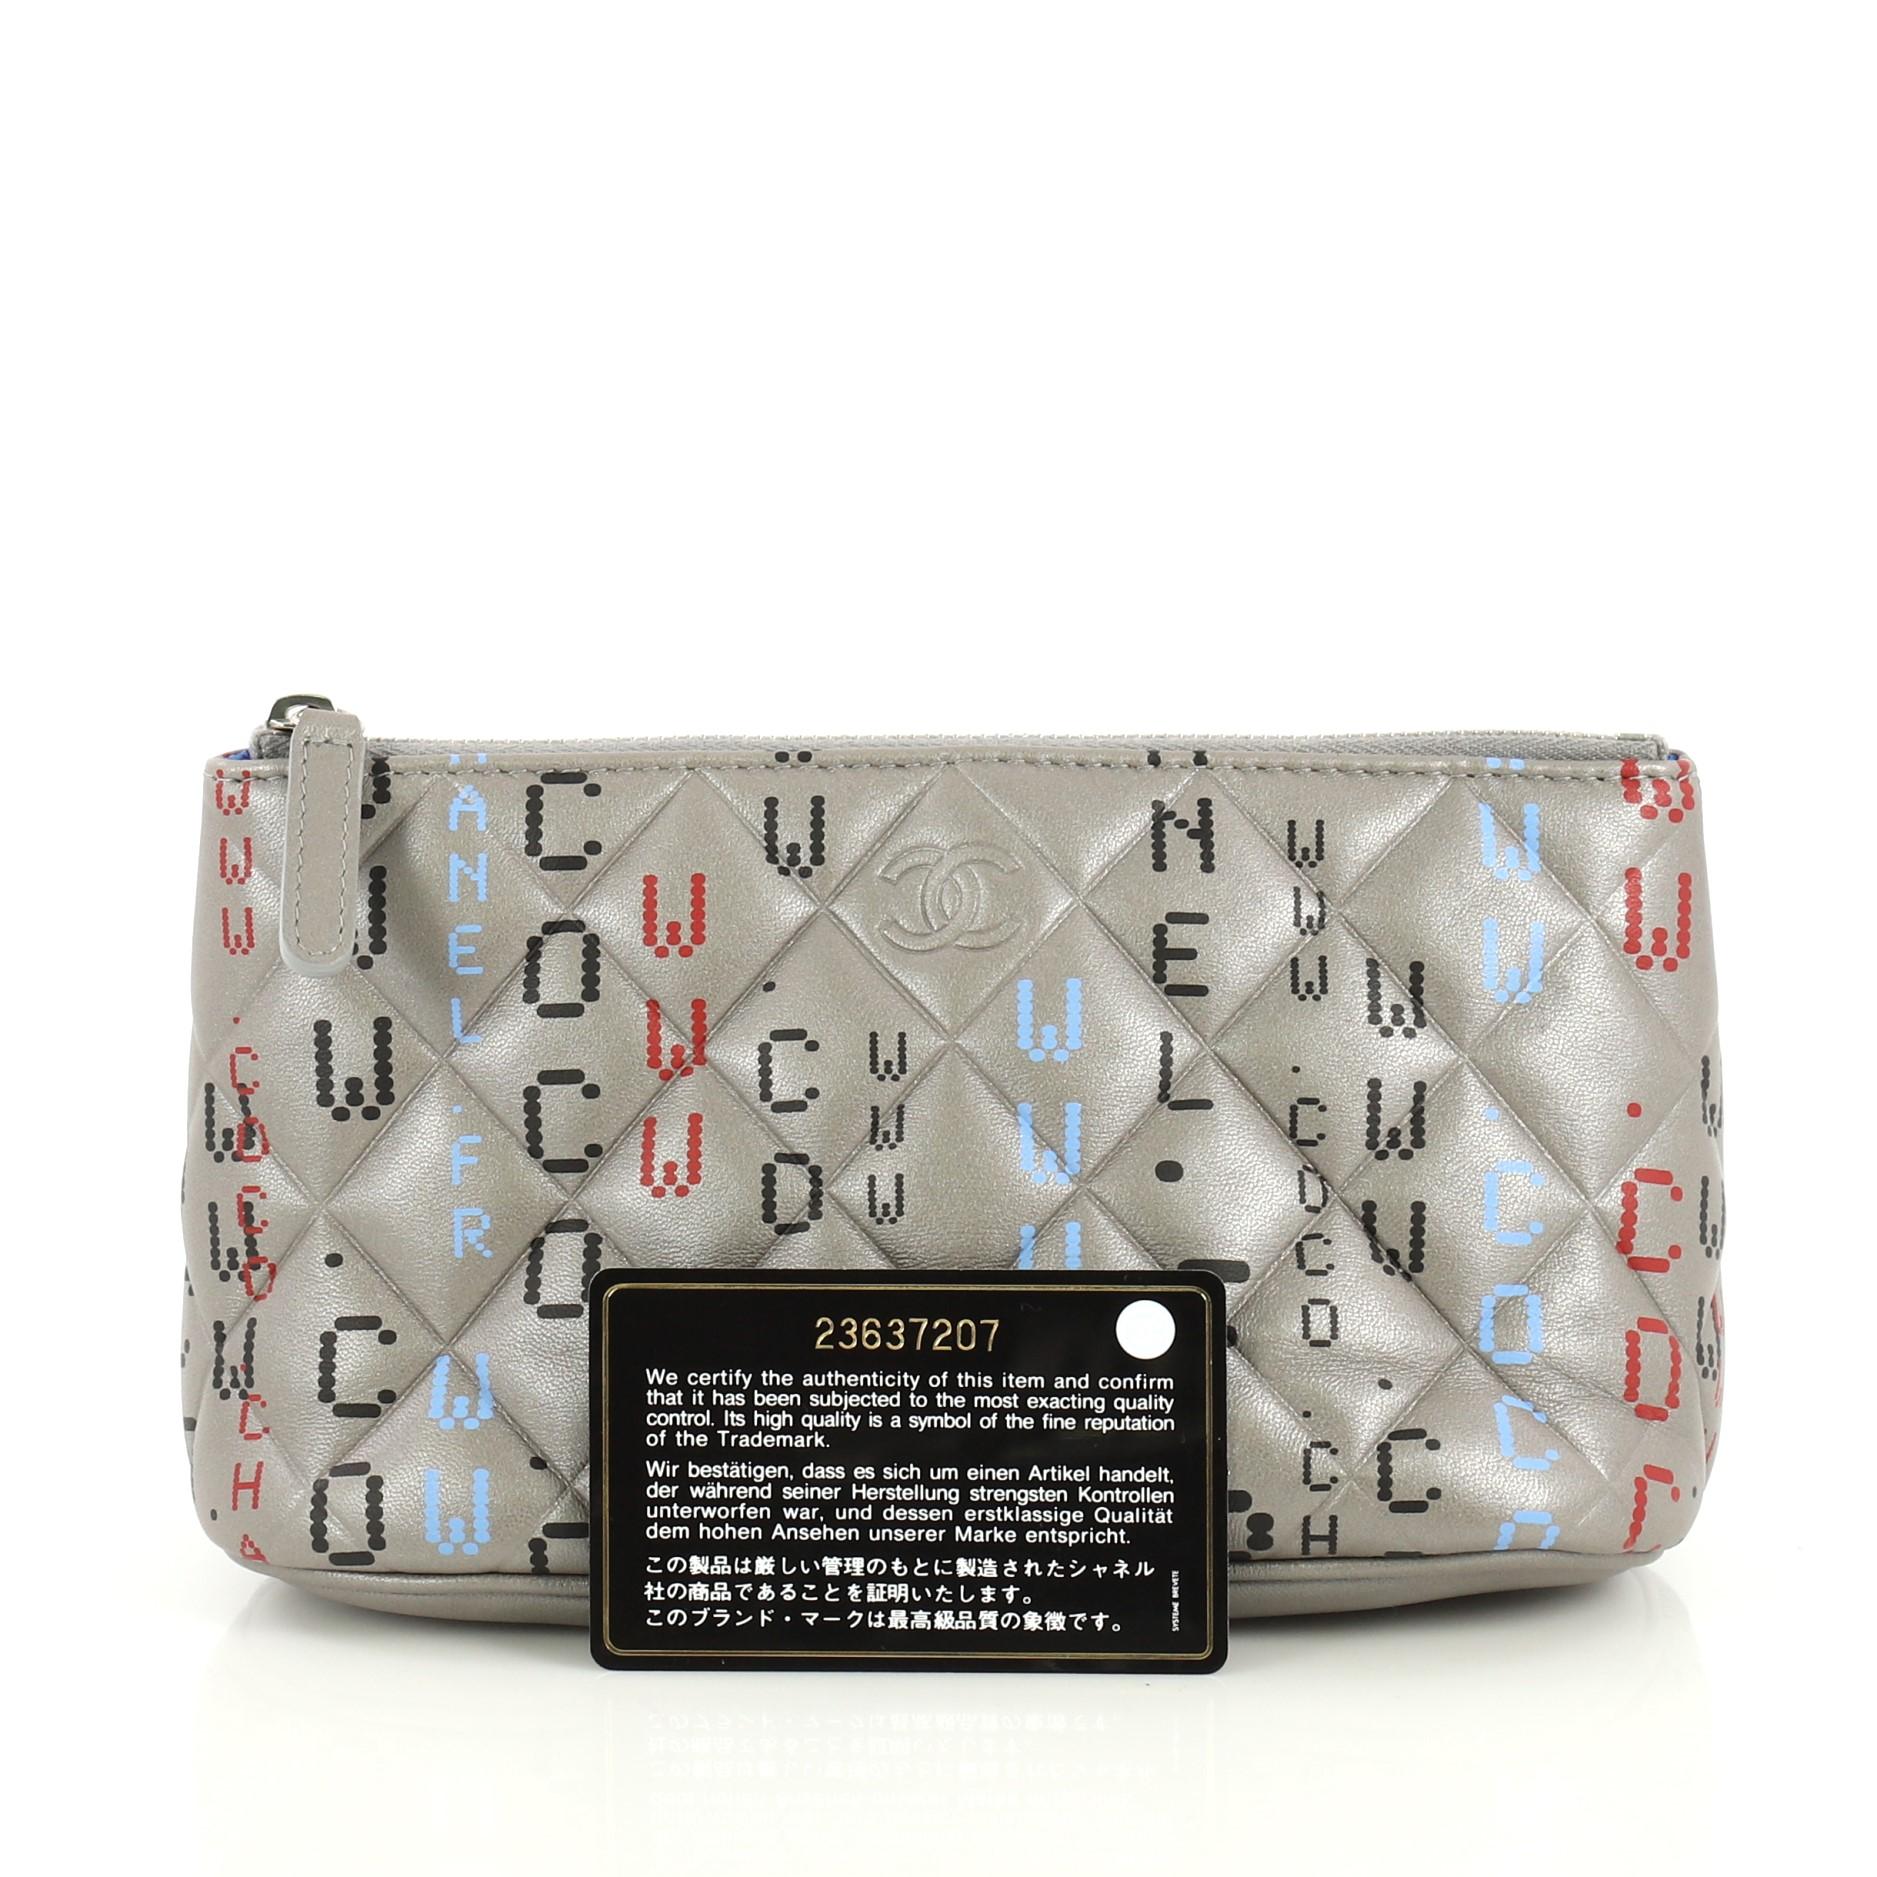 This Chanel Data Center Zip Pouch Quilted Printed Lambskin Small, crafted from gray leather, features multicolored print and silver-tone hardware. Its zip closure opens to a blue nylon interior. Hologram sticker reads: 23637207. 

Condition: